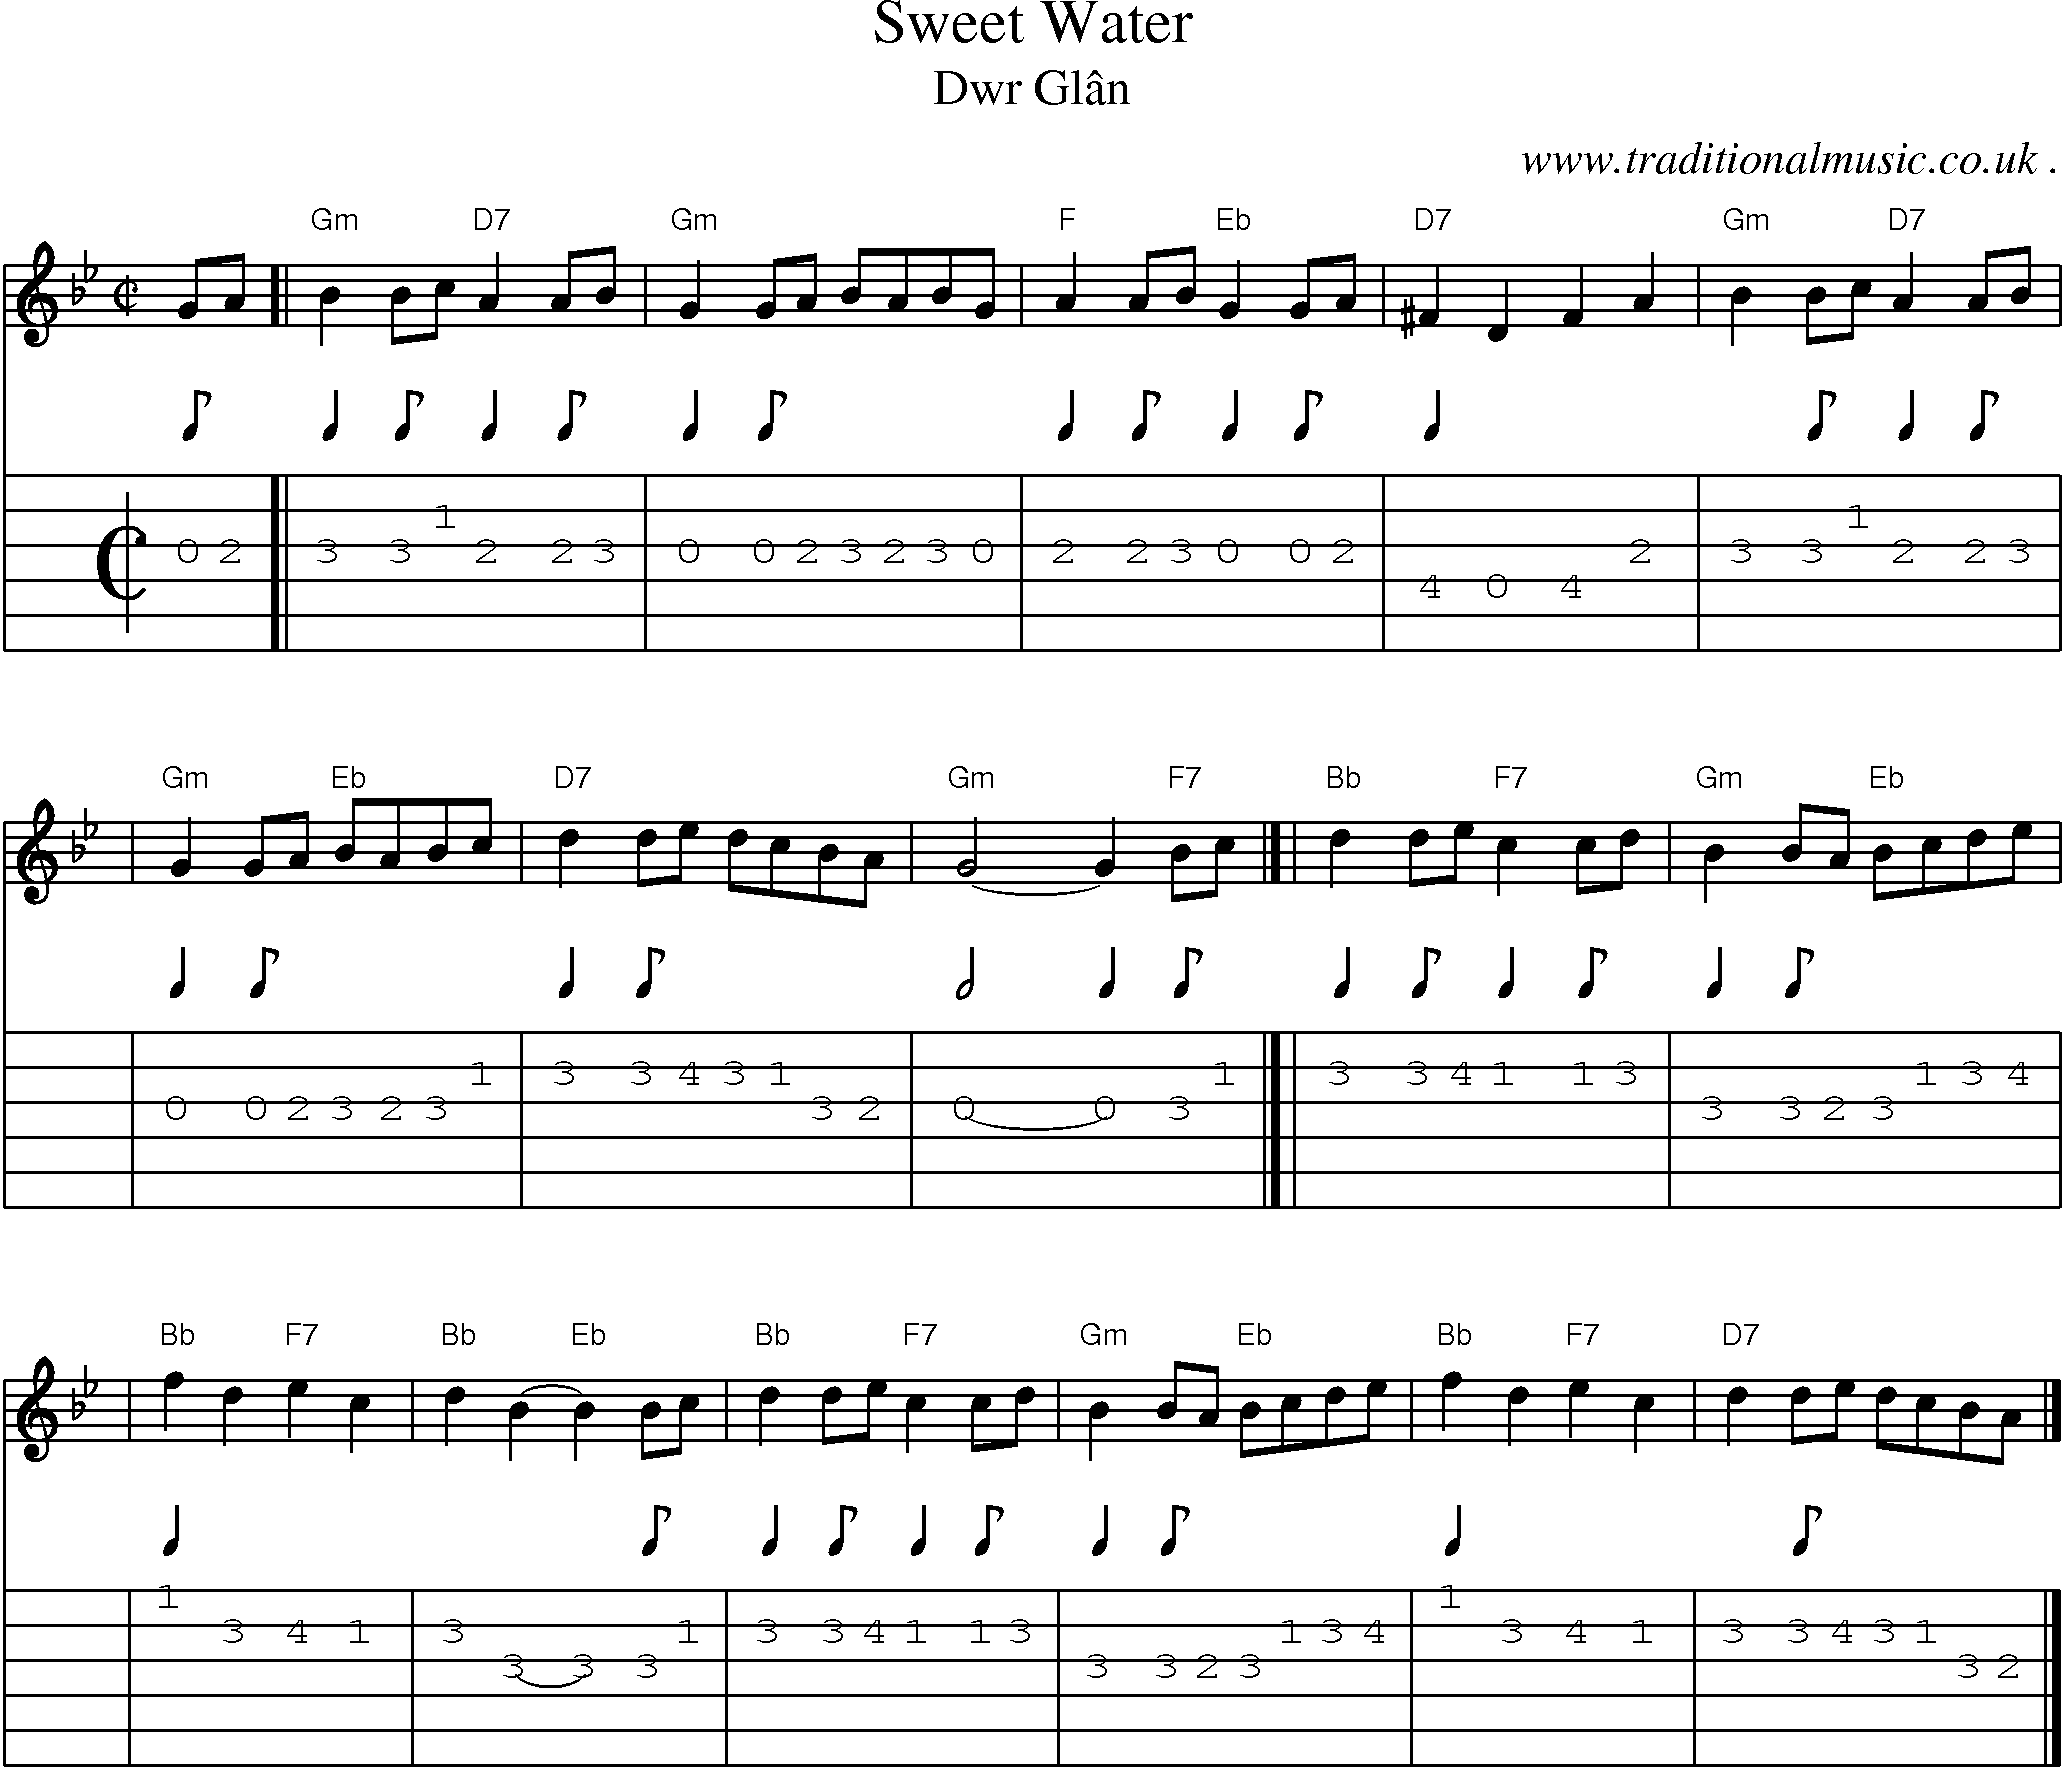 Sheet-music  score, Chords and Guitar Tabs for Sweet Water